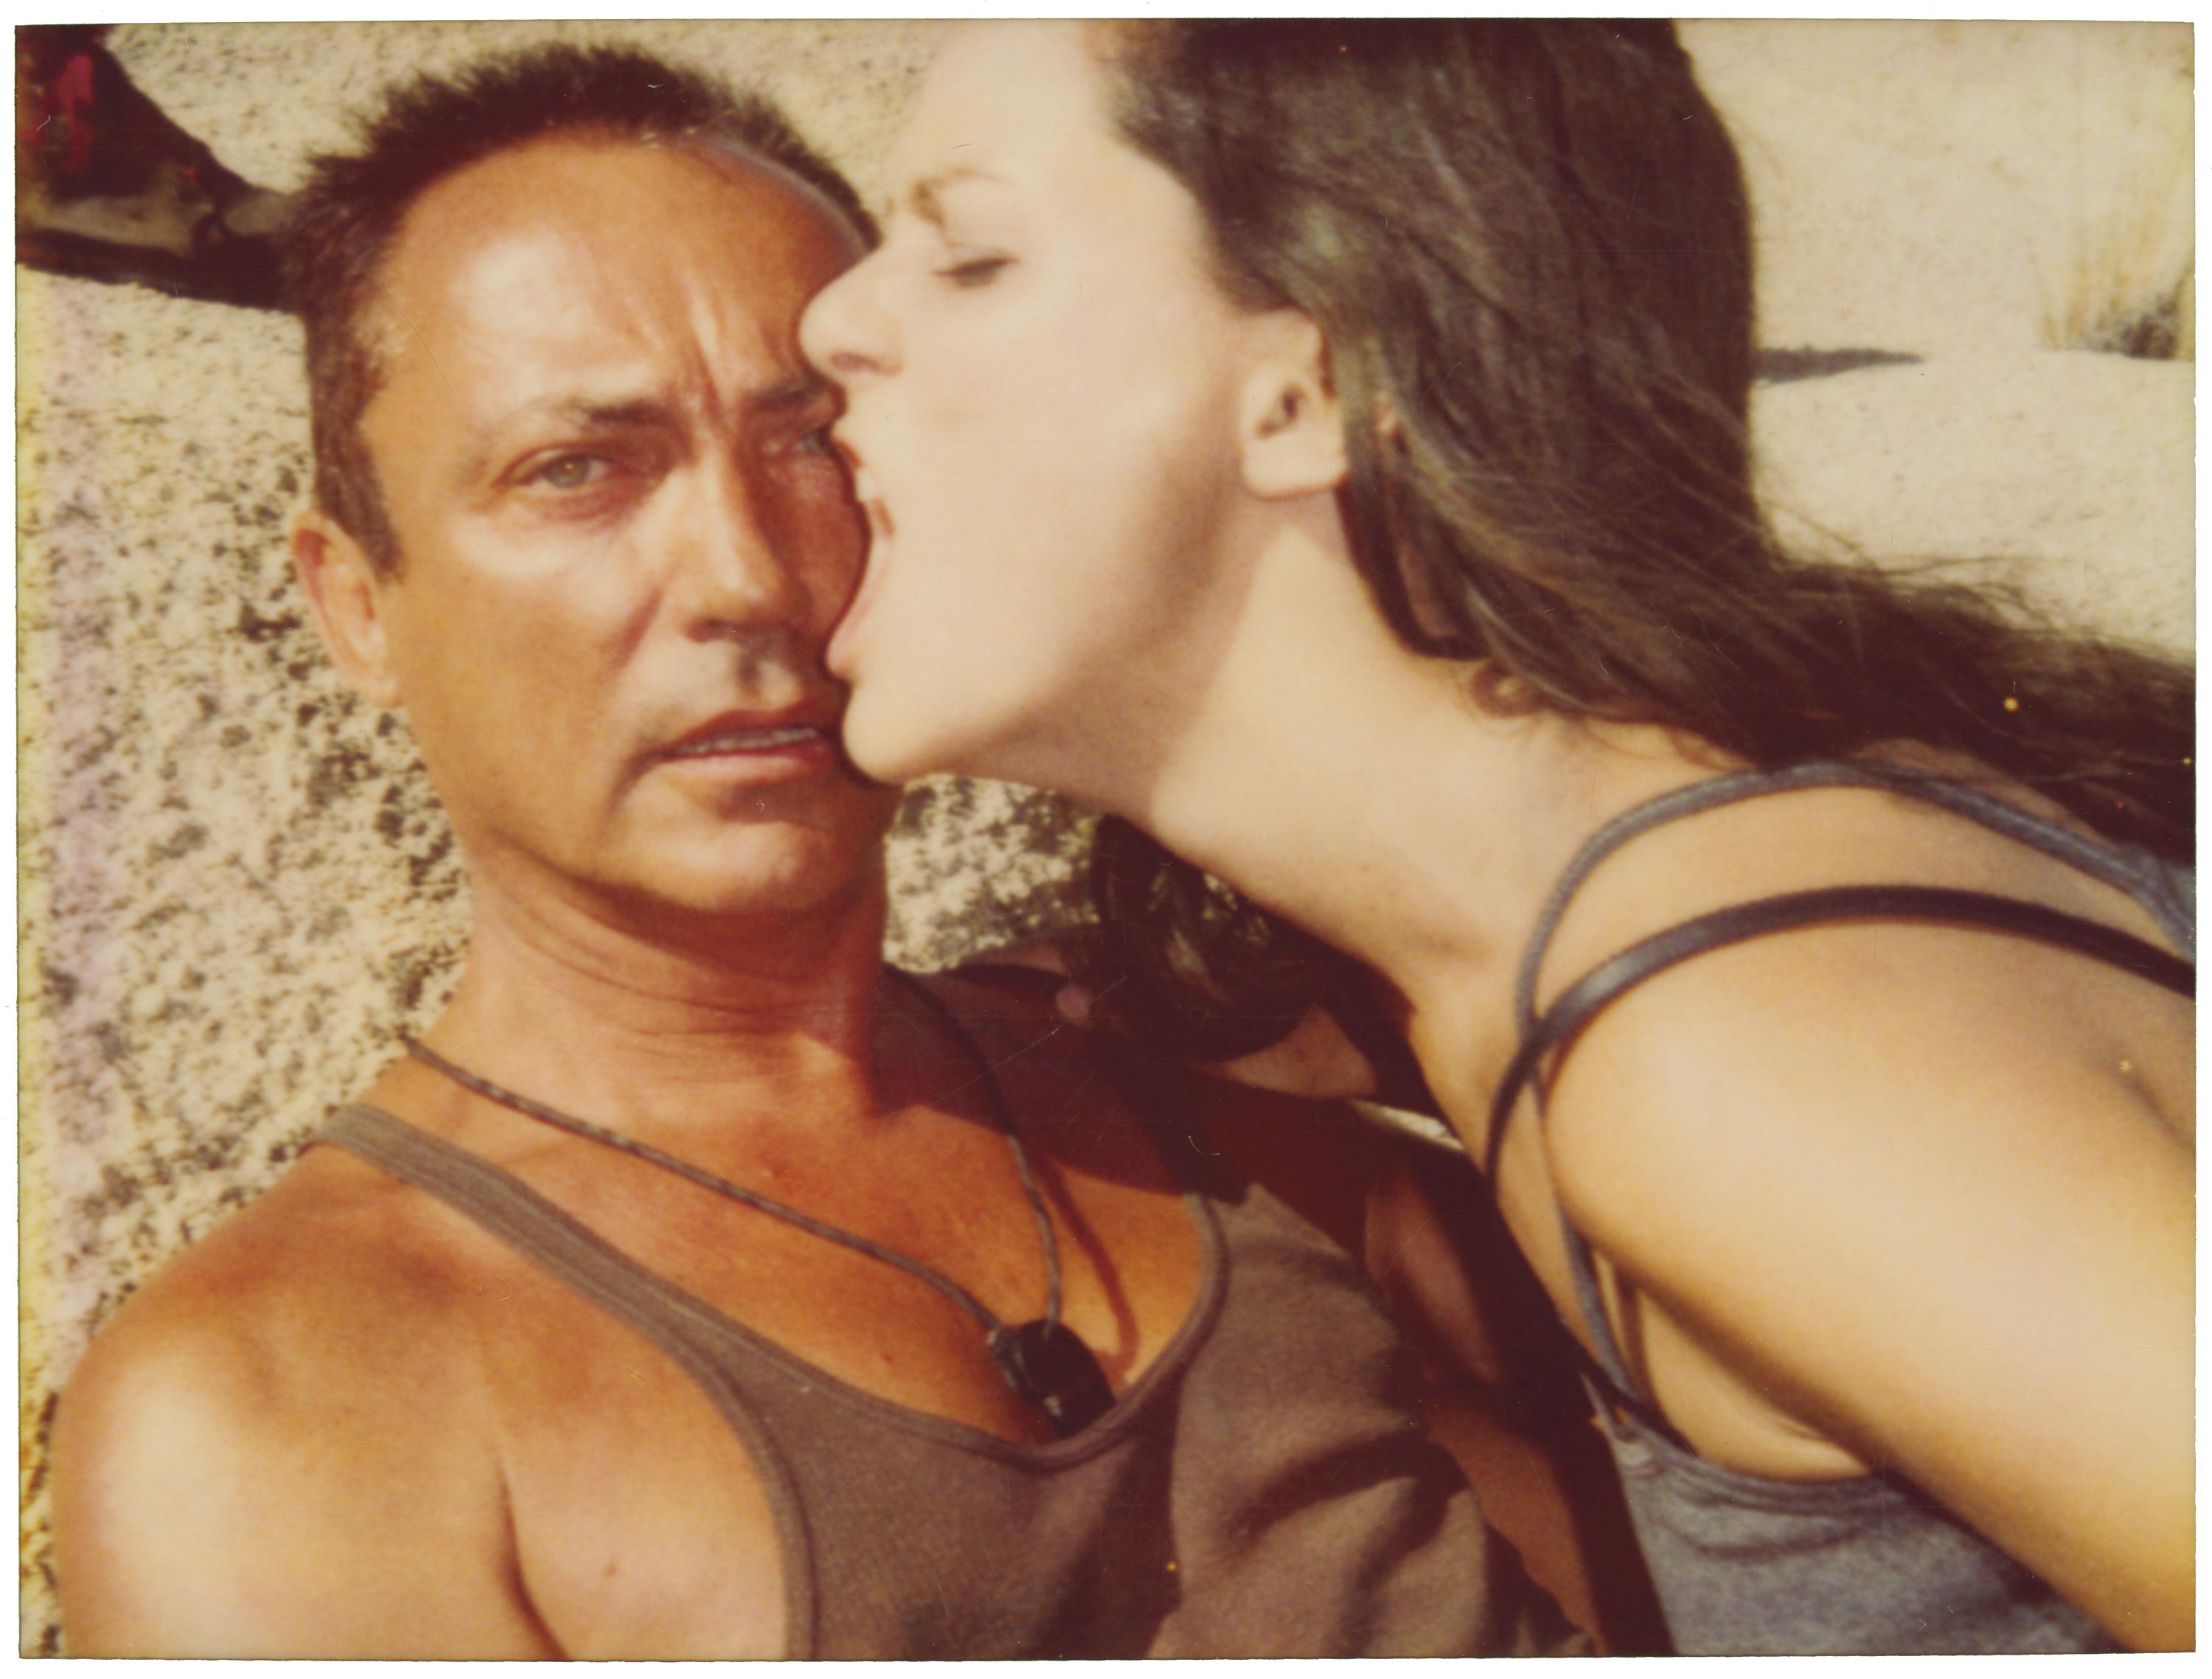 Stefanie Schneider Color Photograph - 'Hans and Penelope' from the movie Immaculate Springs - starring Udo Kier